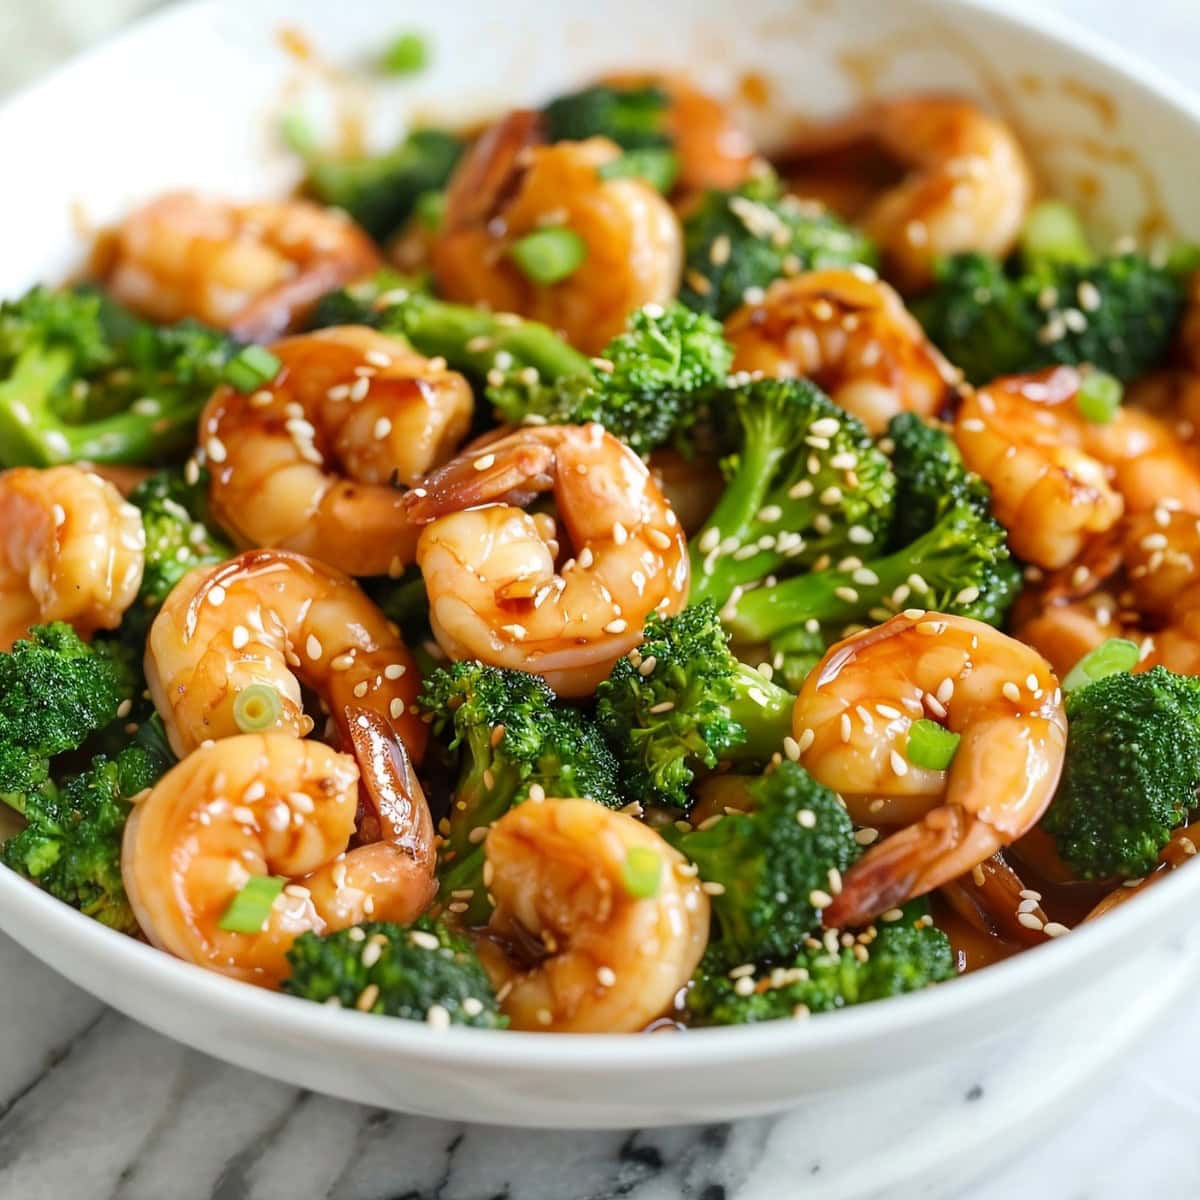 Homemade shrimp and broccoli stir-fry in a bowl with green onions and sesame seeds